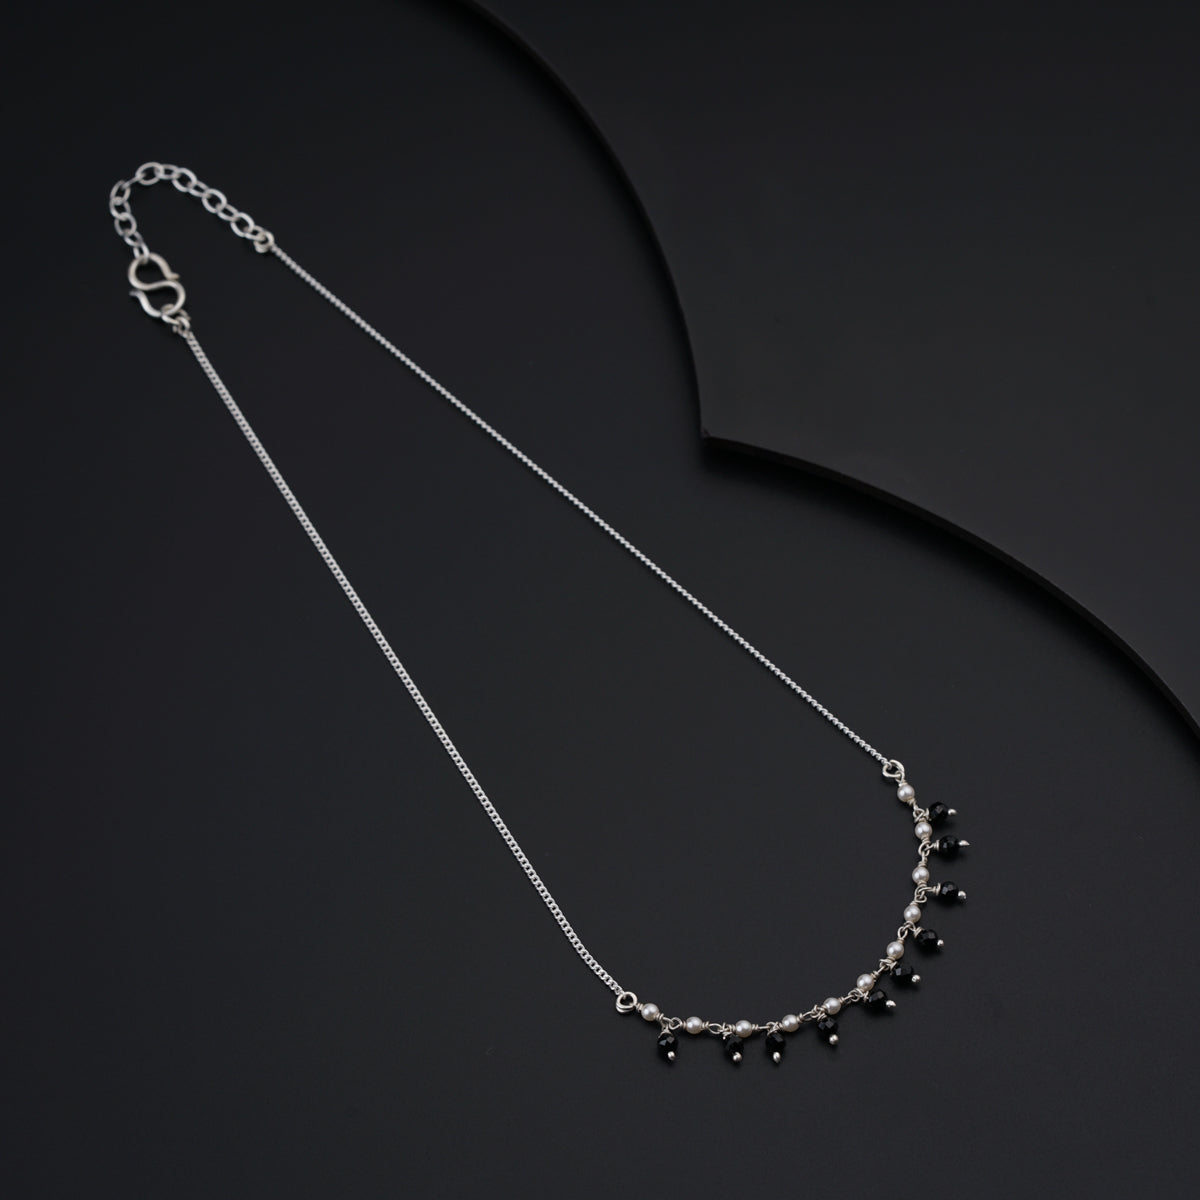 a silver necklace with black beads on a black background